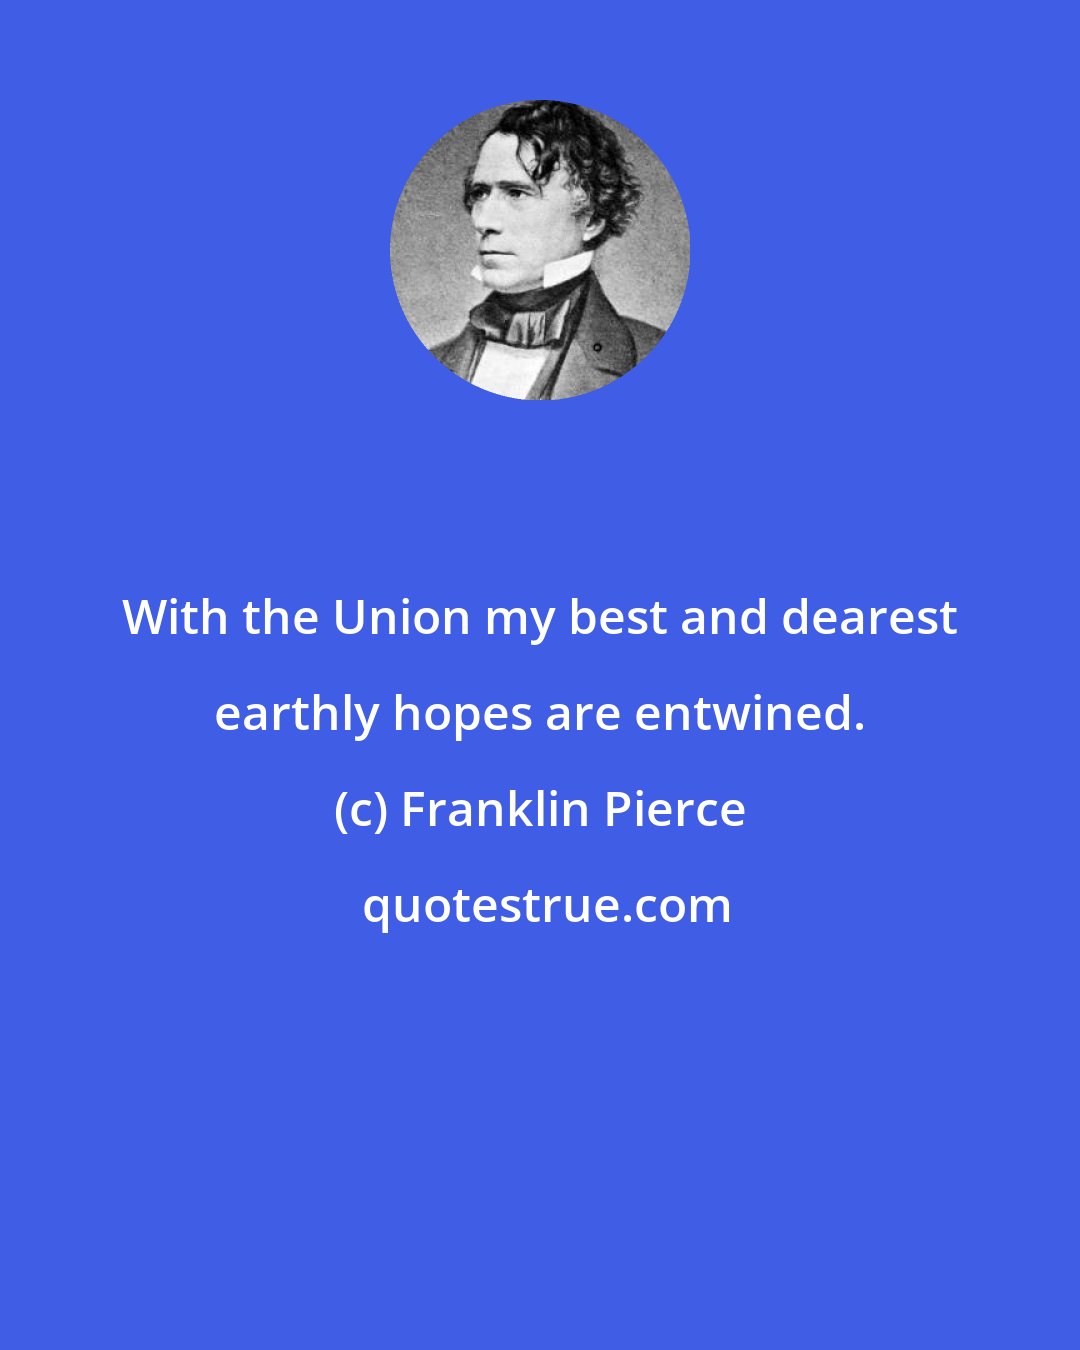 Franklin Pierce: With the Union my best and dearest earthly hopes are entwined.